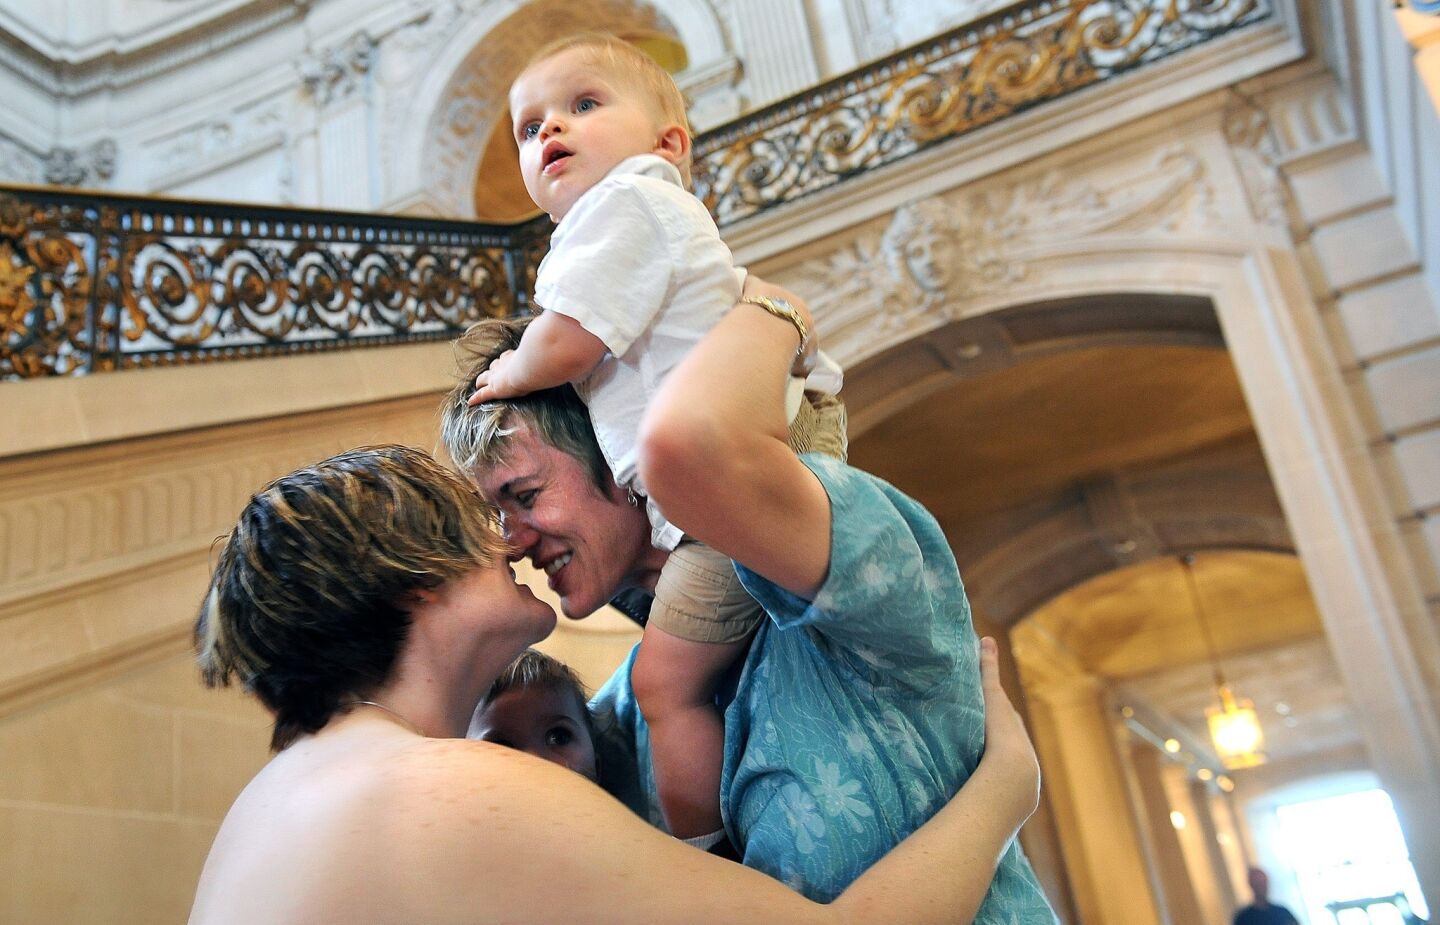 Rachael Hadley left, and her new wife Kim celebrate with their children Sidney, left, and Phin at City Hall while getting married Saturday in San Francisco.